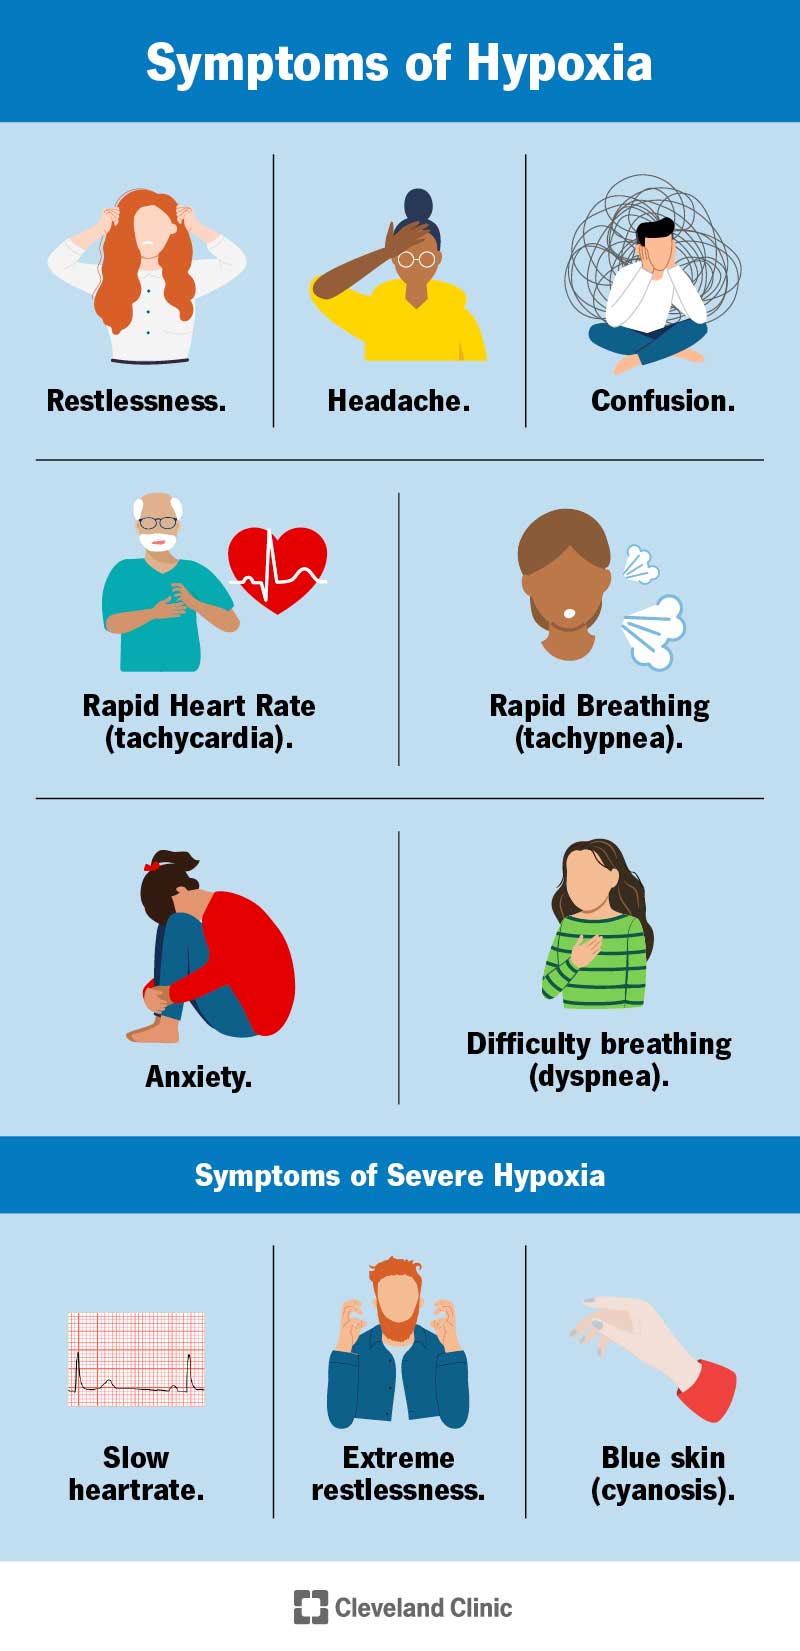 Symptoms of hypoxia include restlessness, headache, confusion, rapid heart rate, rapid breathing, difficulty breathing and more.